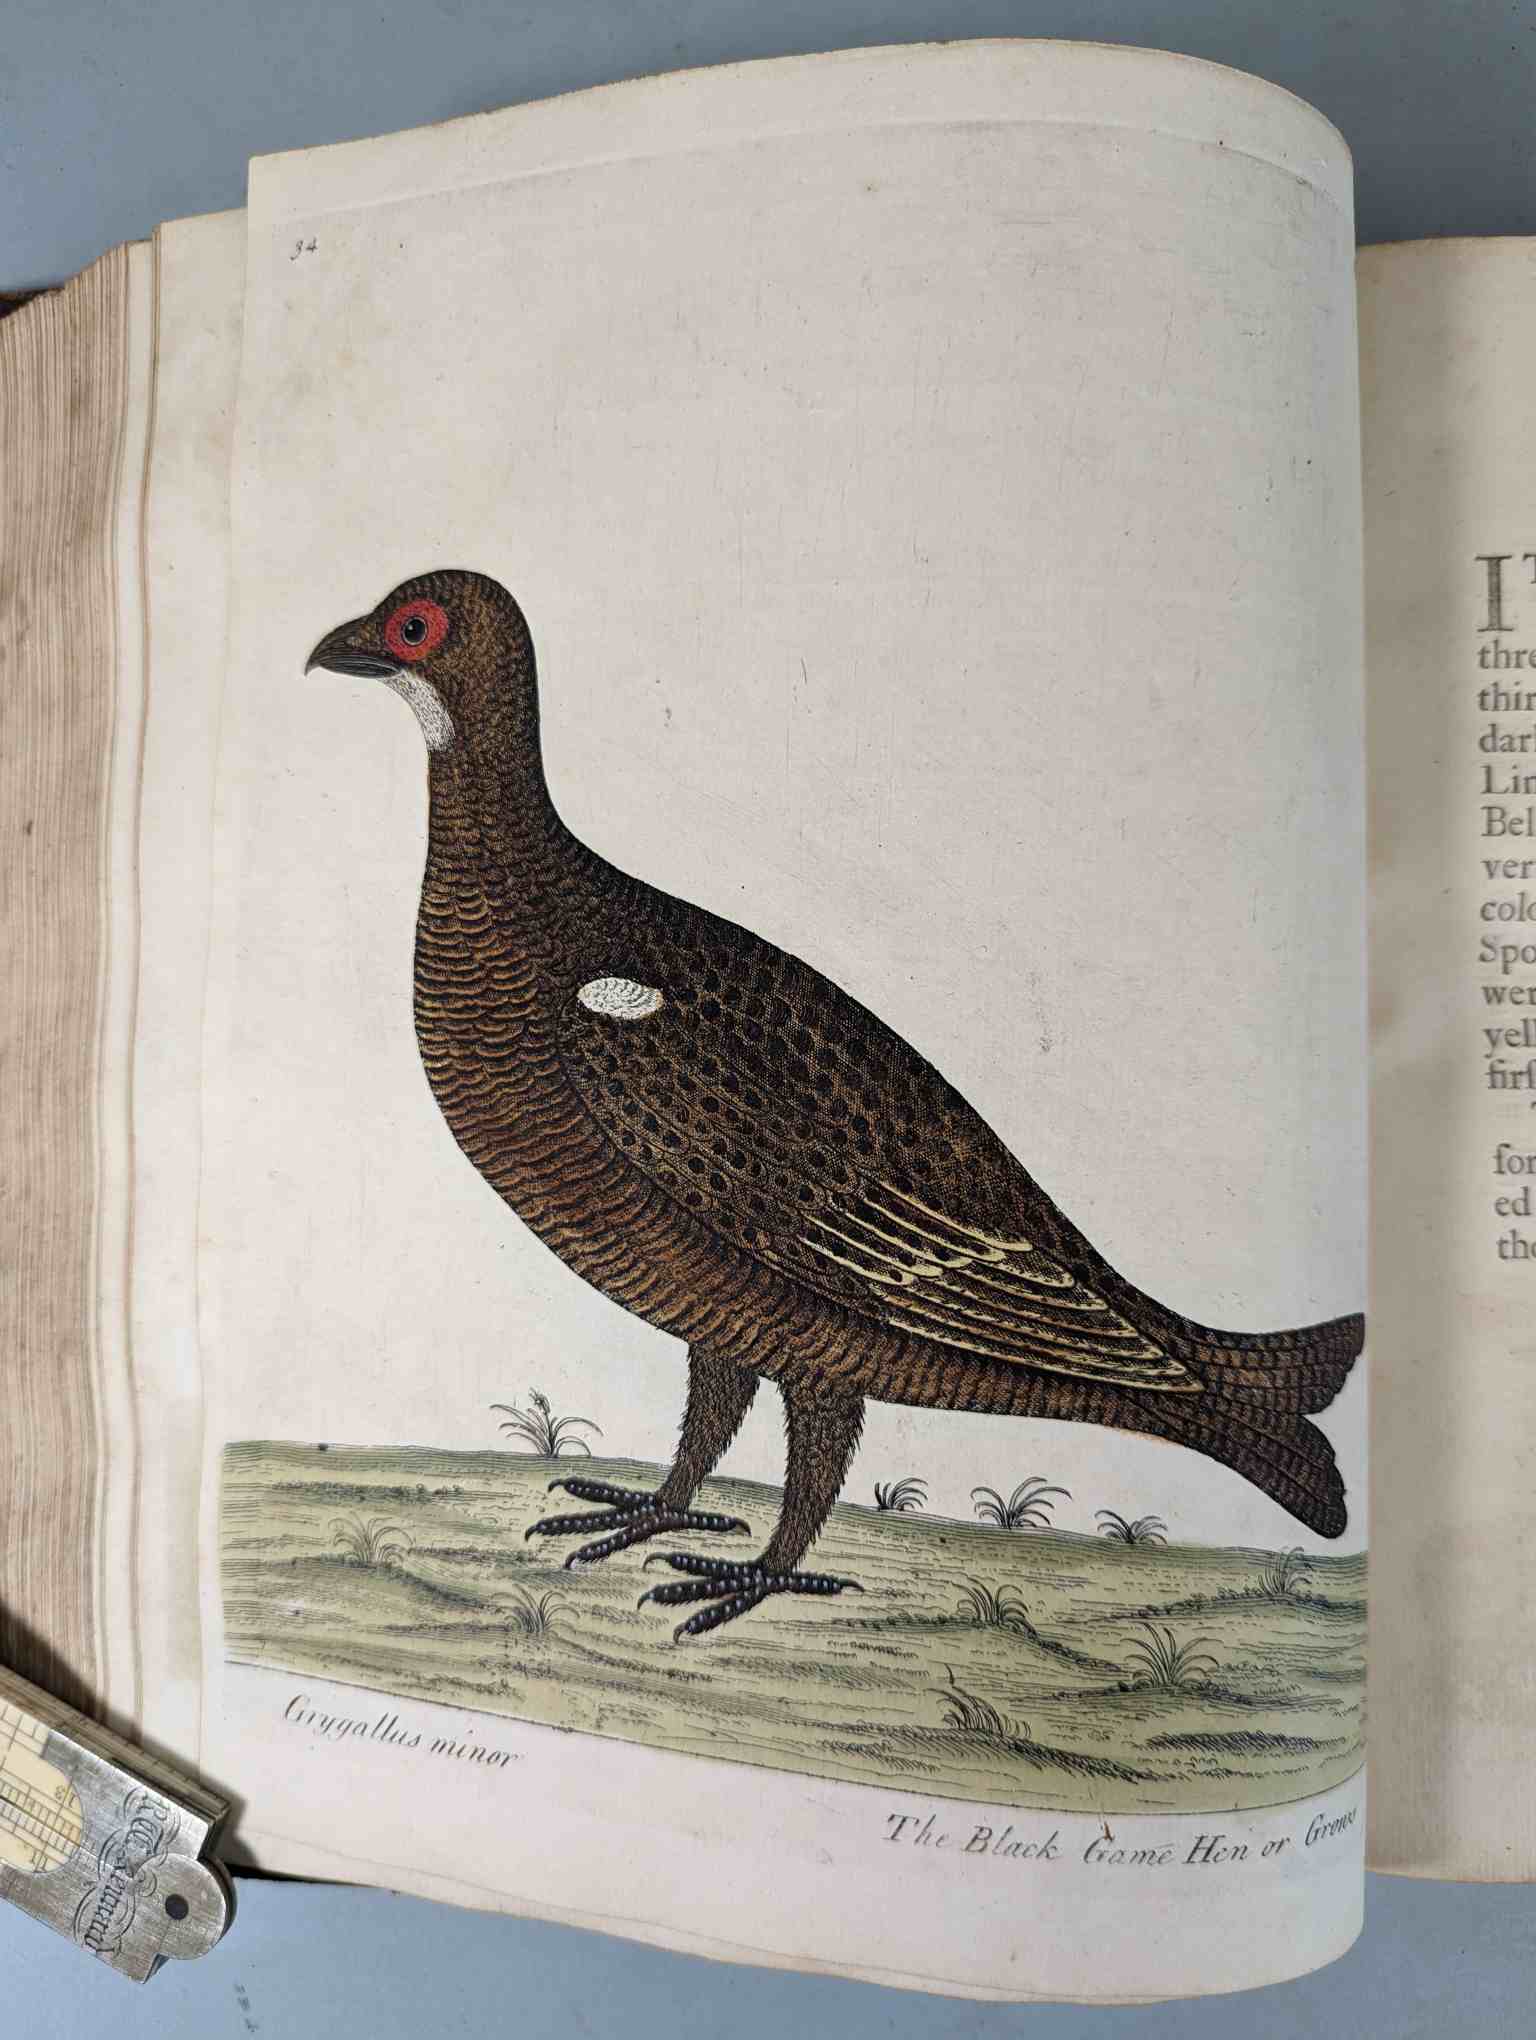 ALBIN, Eleazar. A Natural History of Birds, to which are added, Notes and Observations by W. - Image 138 of 208